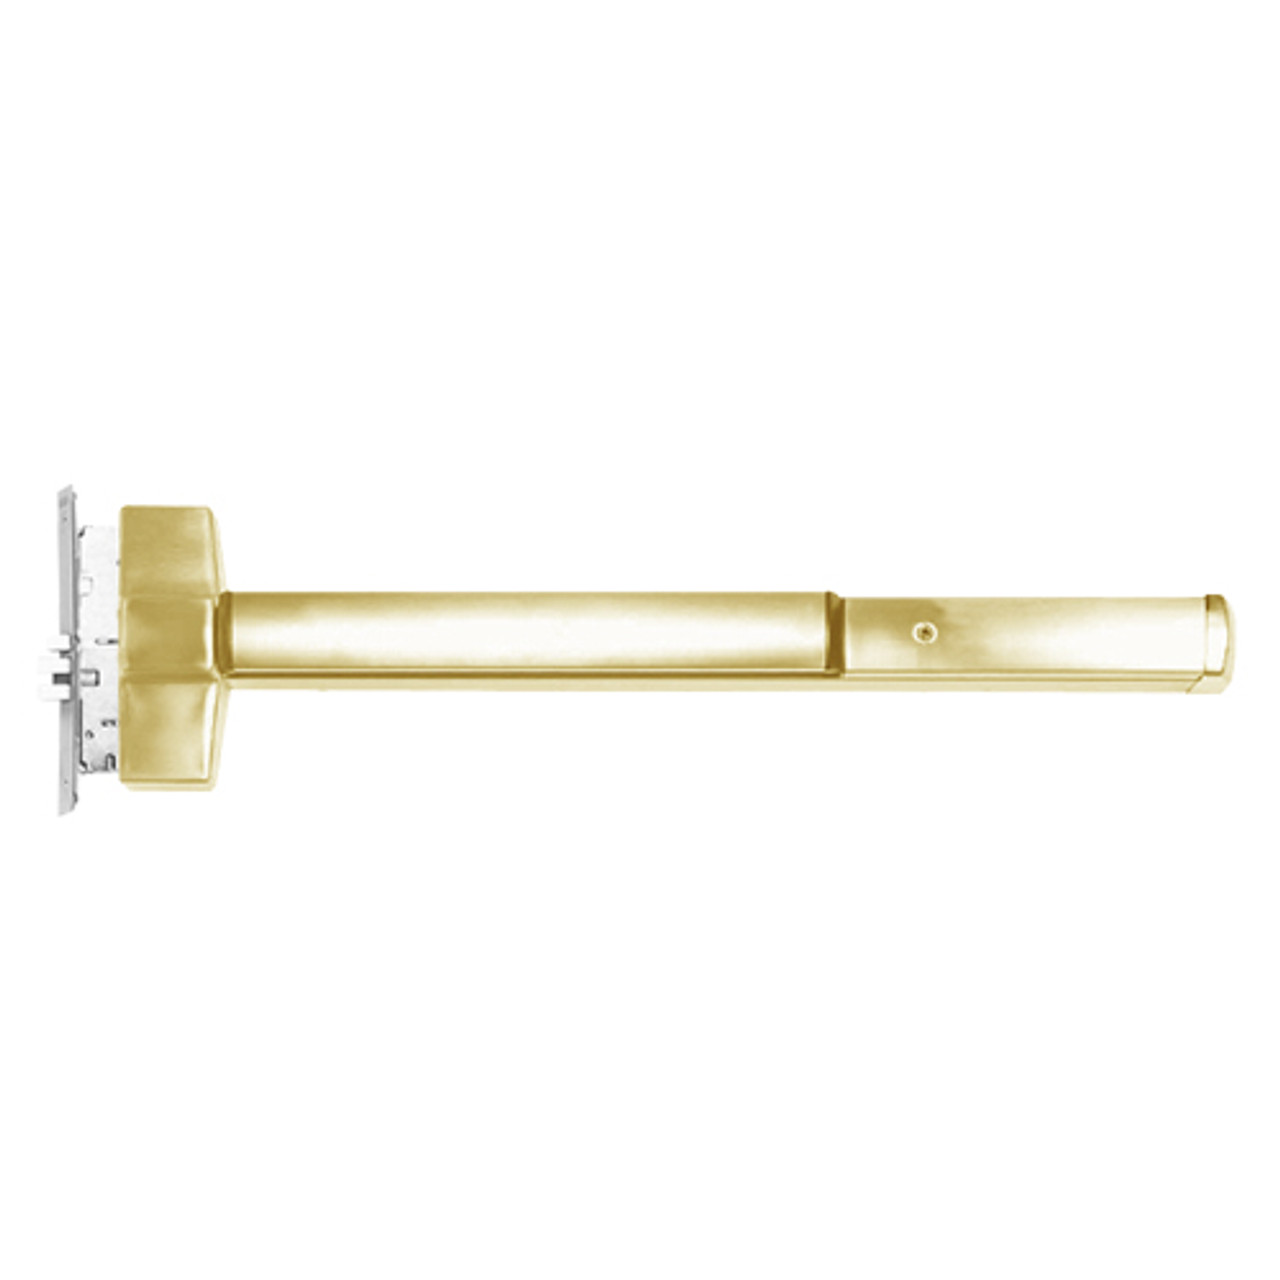 ED5600TD-606-LHR Corbin ED5600 Series Non Fire Rated Mortise Exit Device with Delayed Egress in Satin Brass Finish